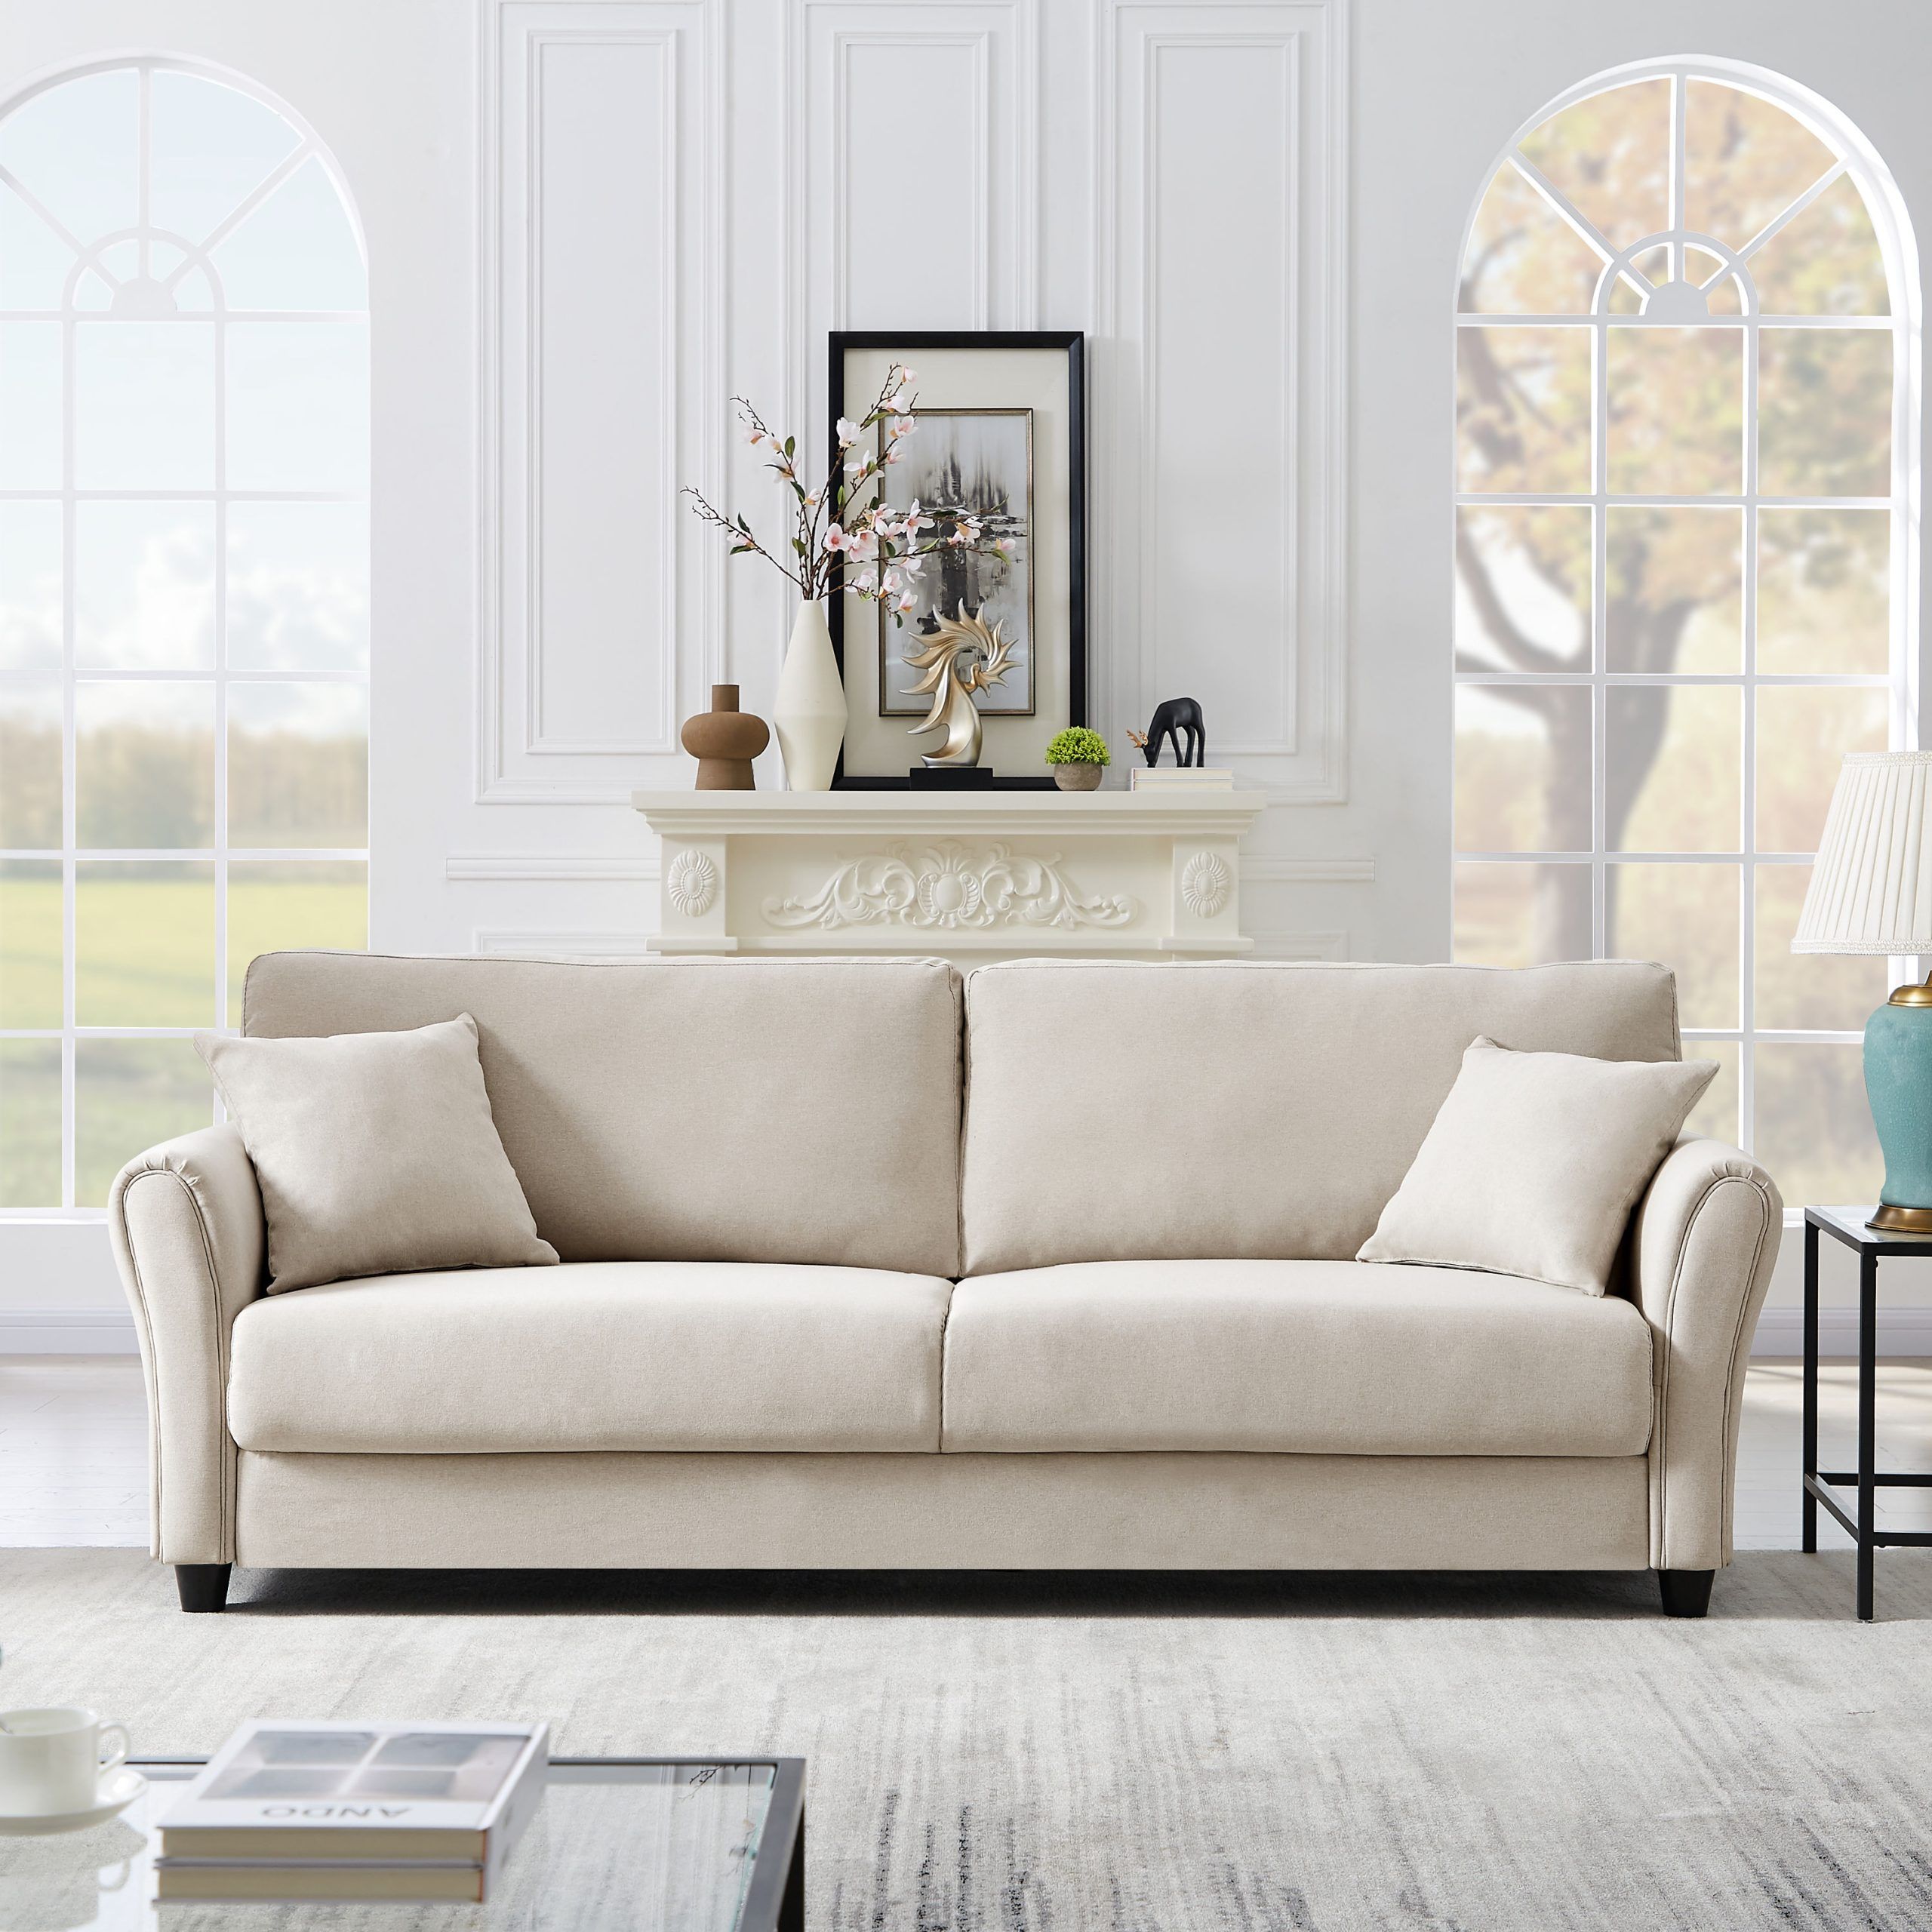 Casainc Fabric 3 Seater Sofa 31.89 In Modern Beige Linen Sofa In The Couches,  Sofas & Loveseats Department At Lowes With Regard To Sofas In Beige (Photo 15 of 15)